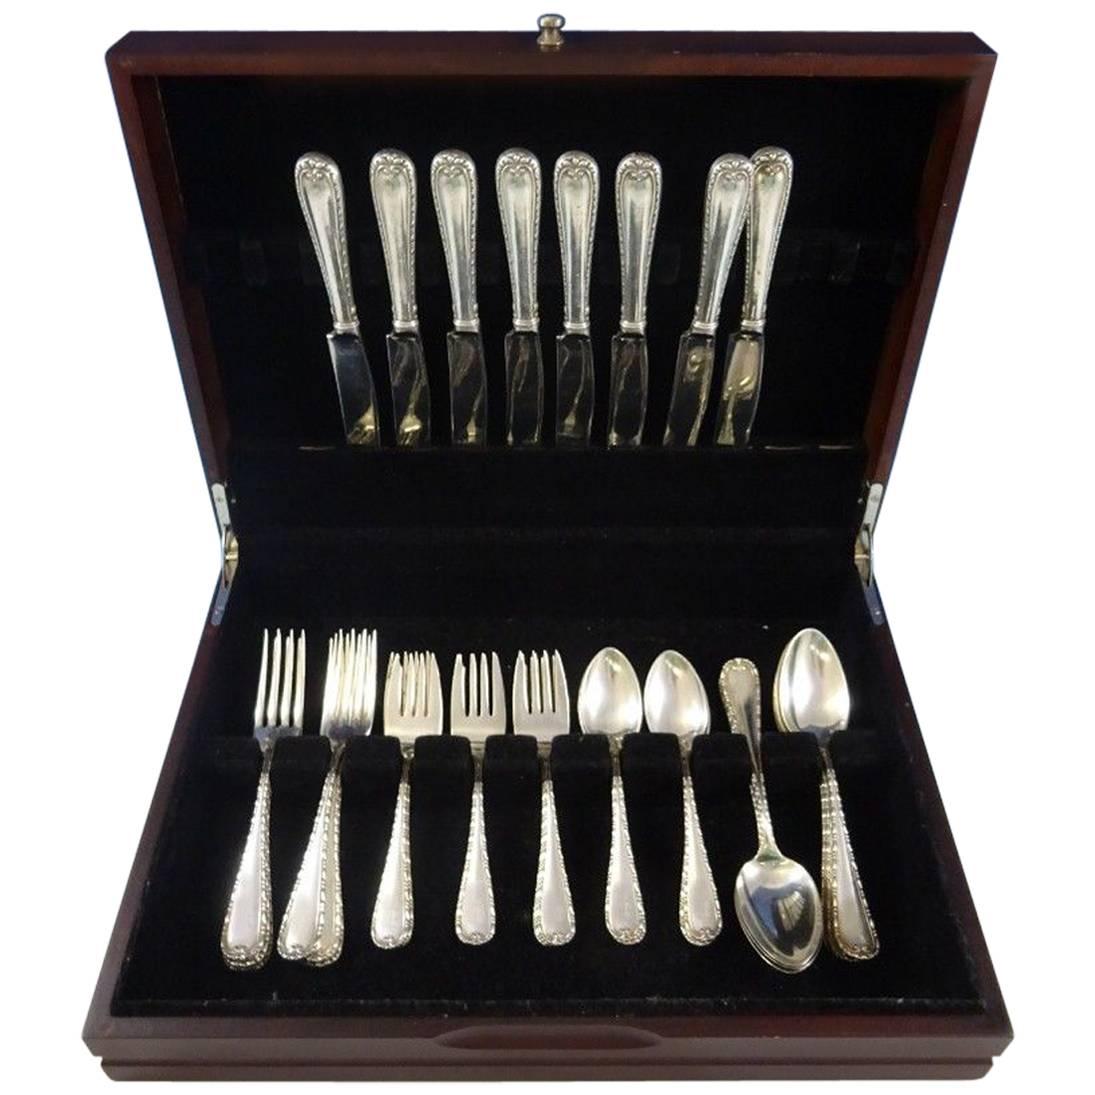 Rare crystal by Frank Whiting sterling silver 40 piece flatware set. This set includes:

Eight knives, 8 5/8